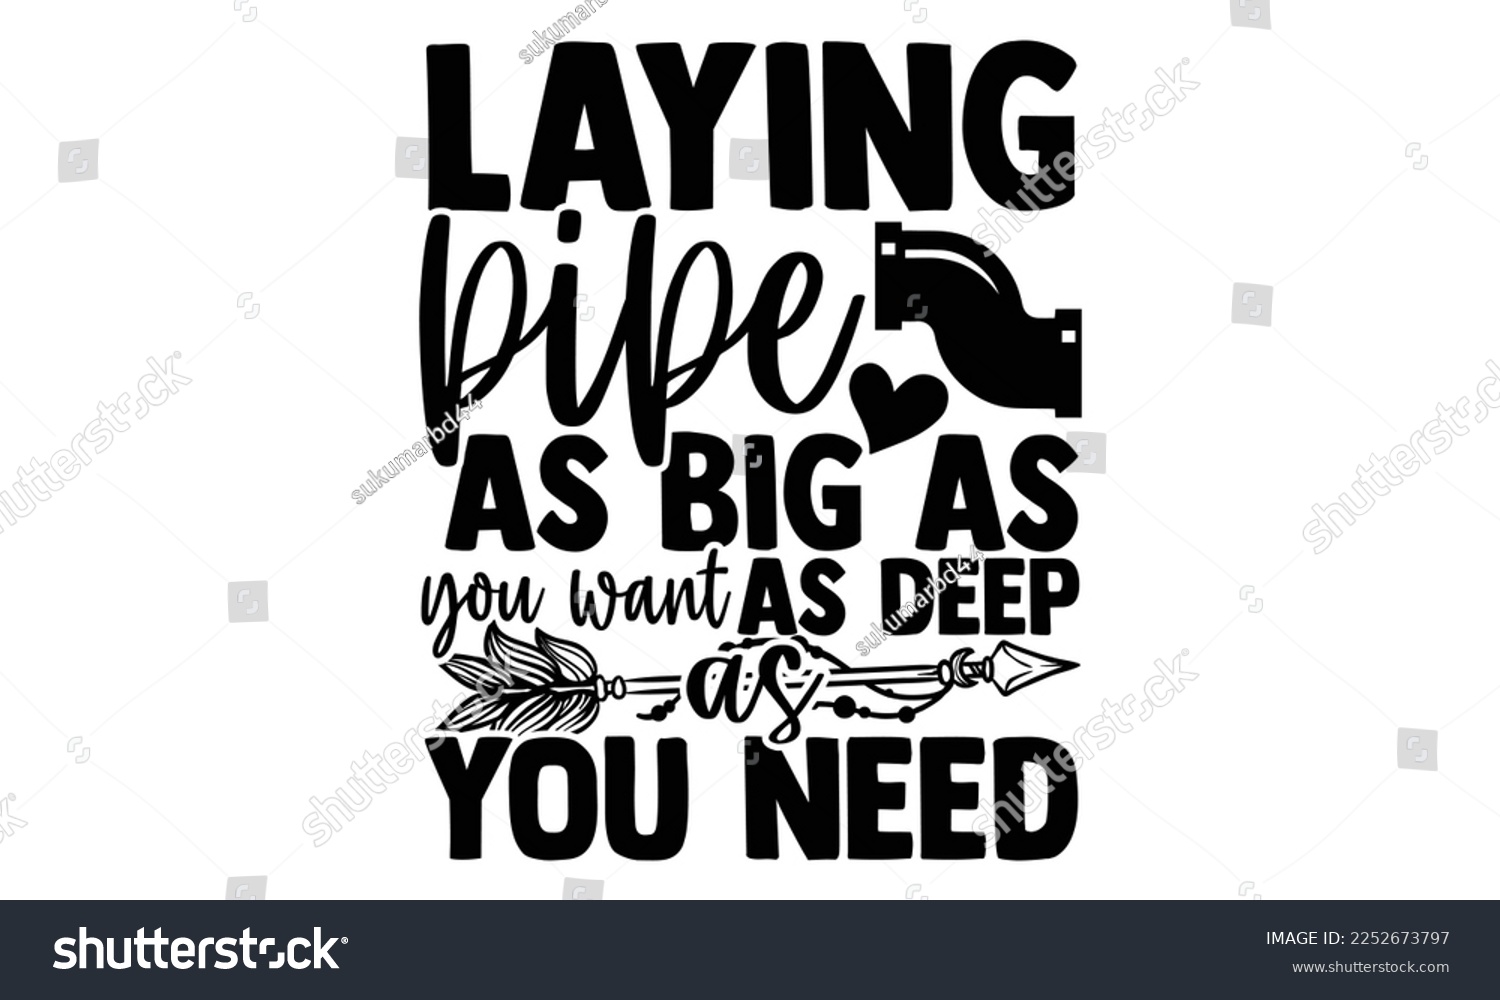 SVG of Laying Pipe As Big As You Want As Deep As You Need - Plumber T shirt Design. Hand drawn lettering phrase, calligraphy vector illustration. eps, svg Files for Cutting svg